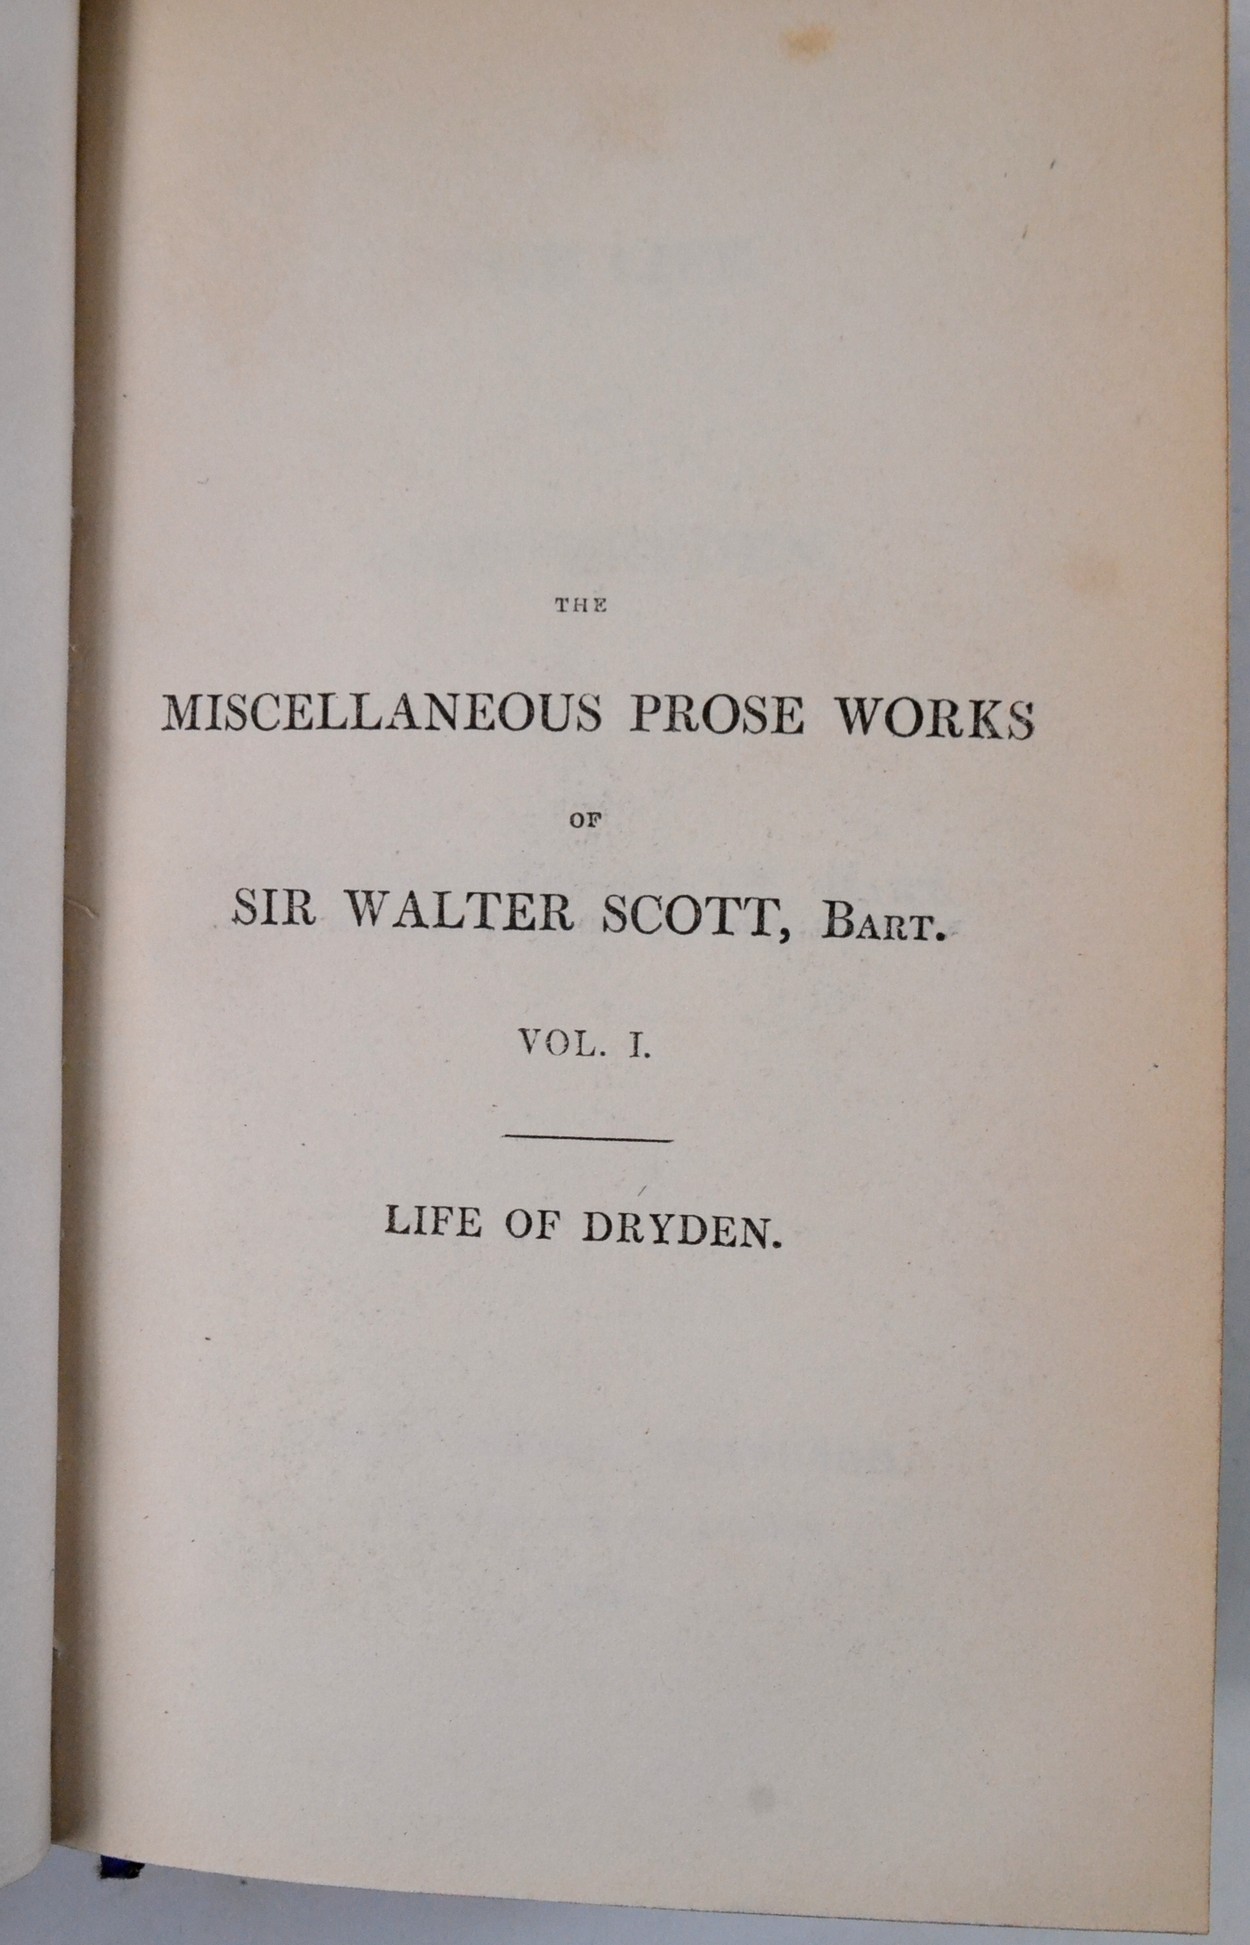 RARE Miscellaneous prose works by Sir Walter Scott (30 volumes) - Image 6 of 13